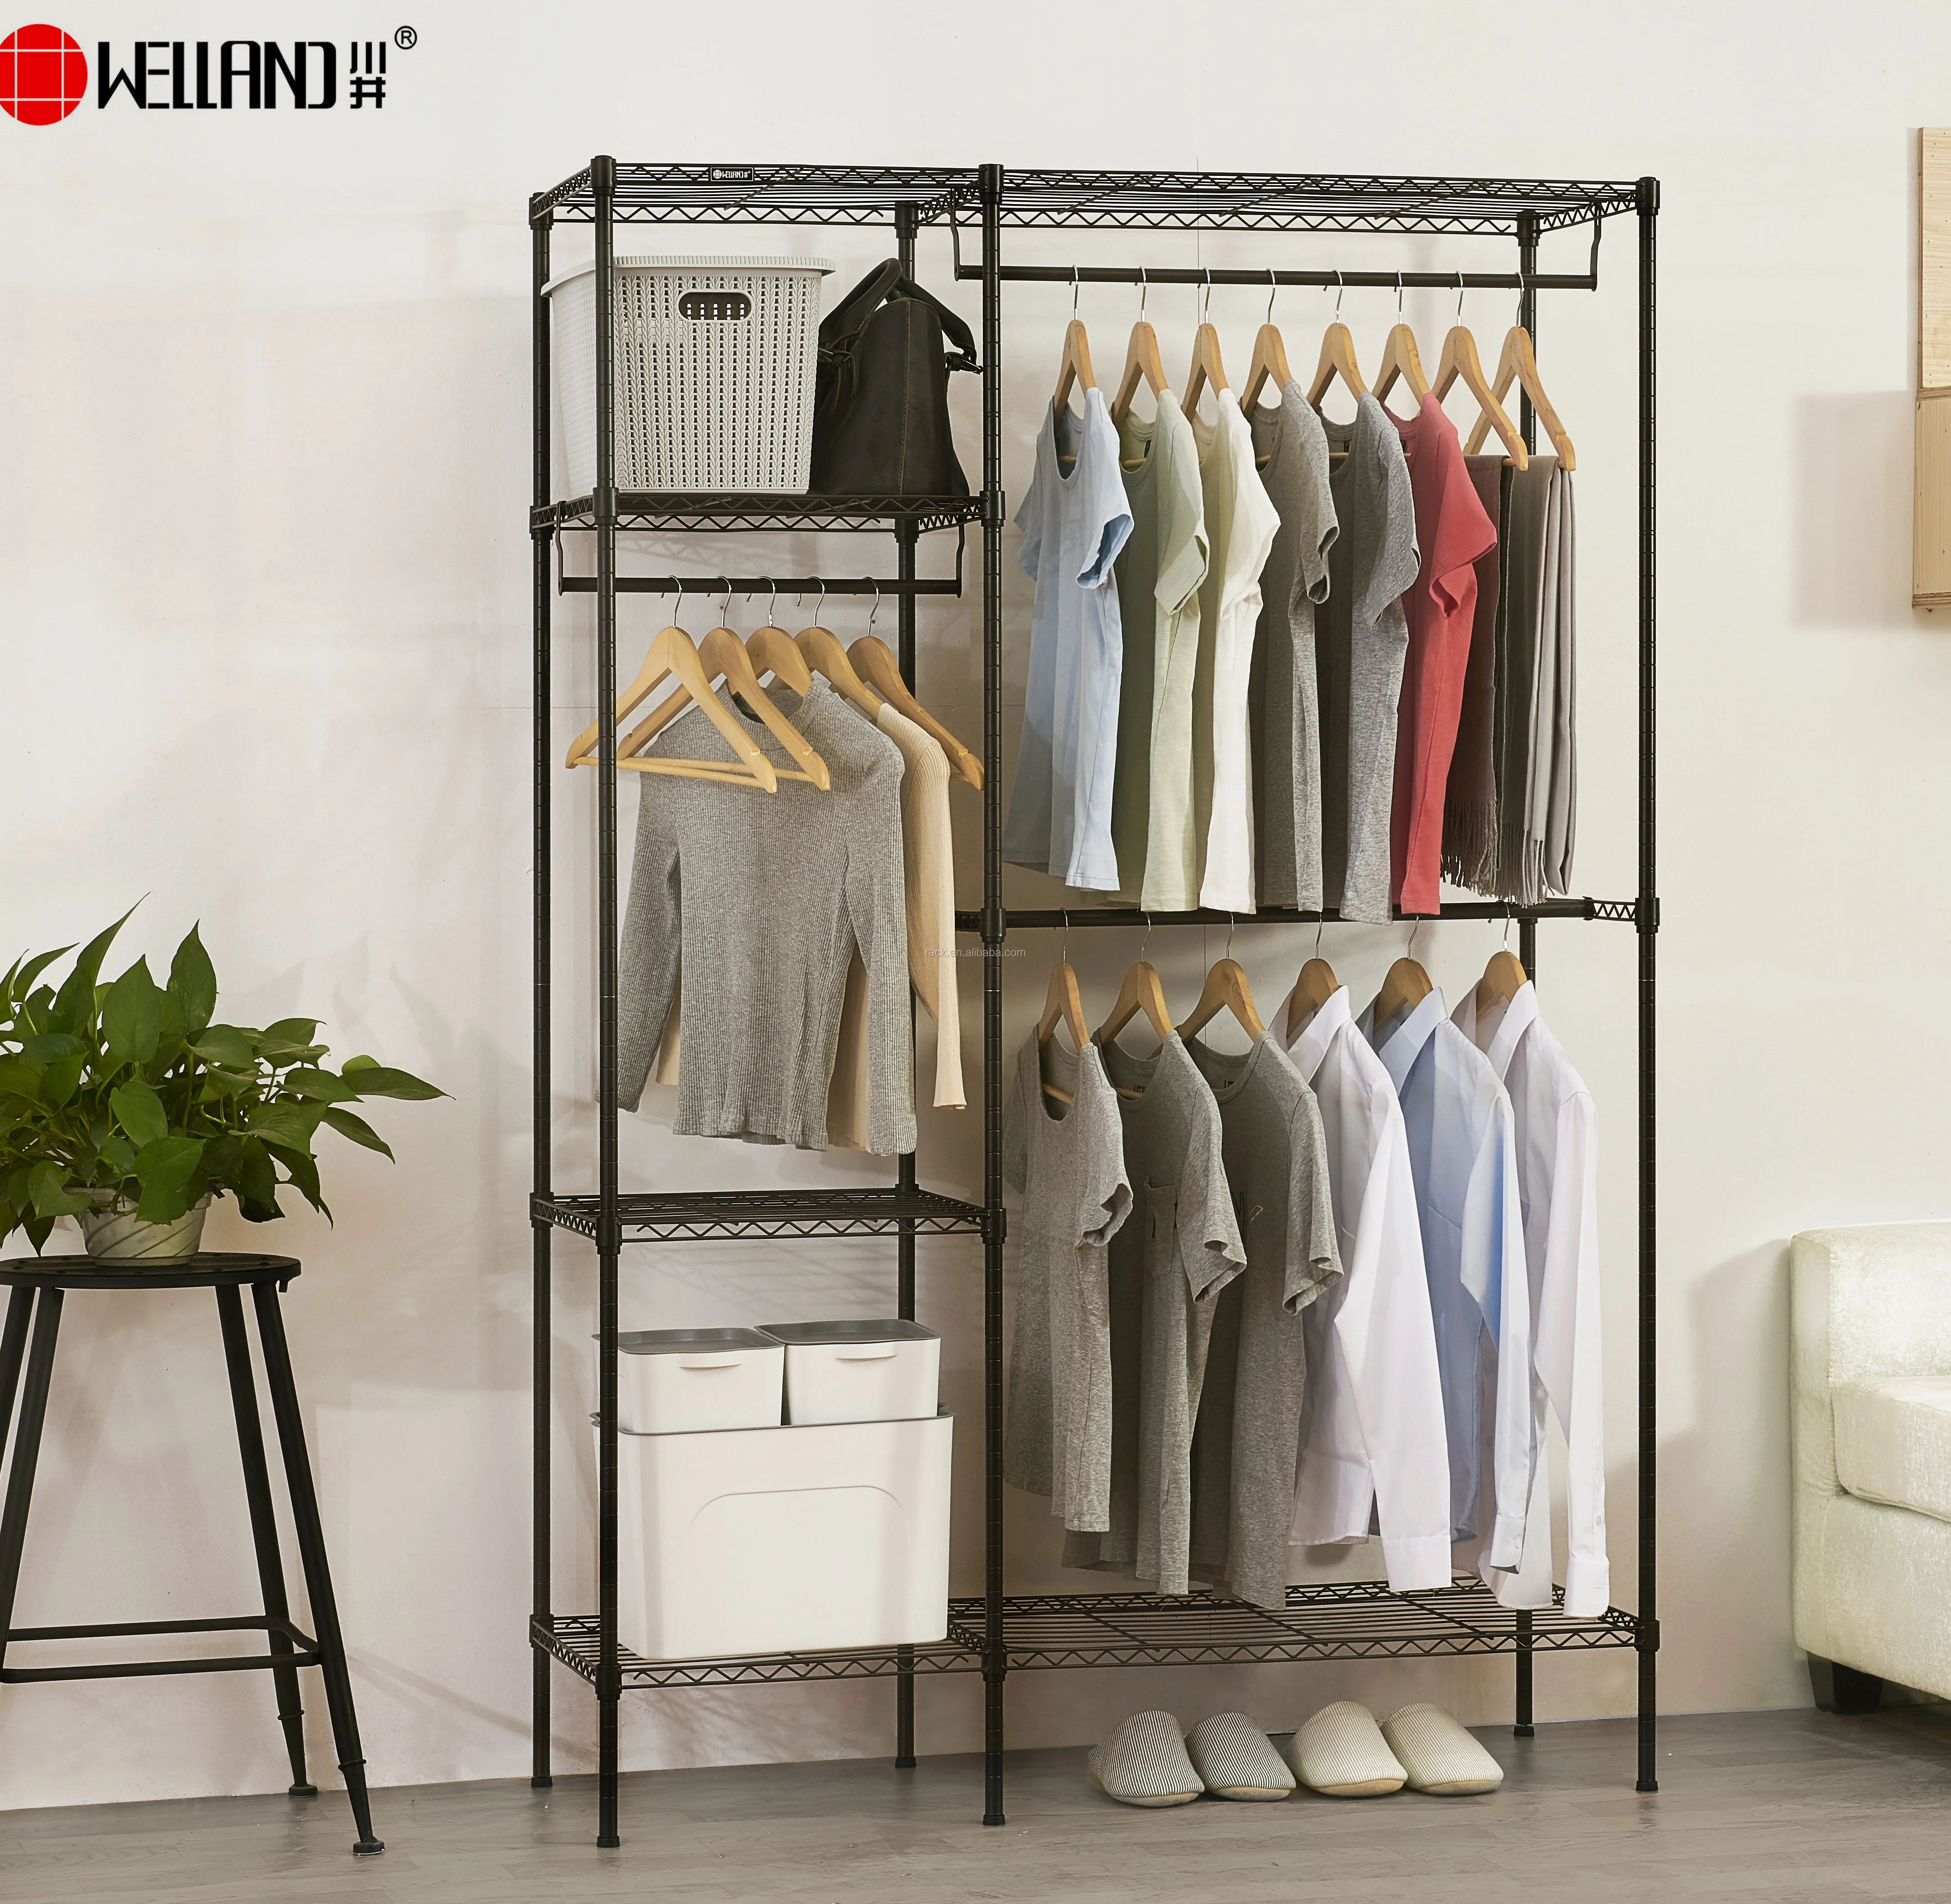 Adjustable Metal Wire Closet Shelving For Wardrobe Rack With Non-woven ...